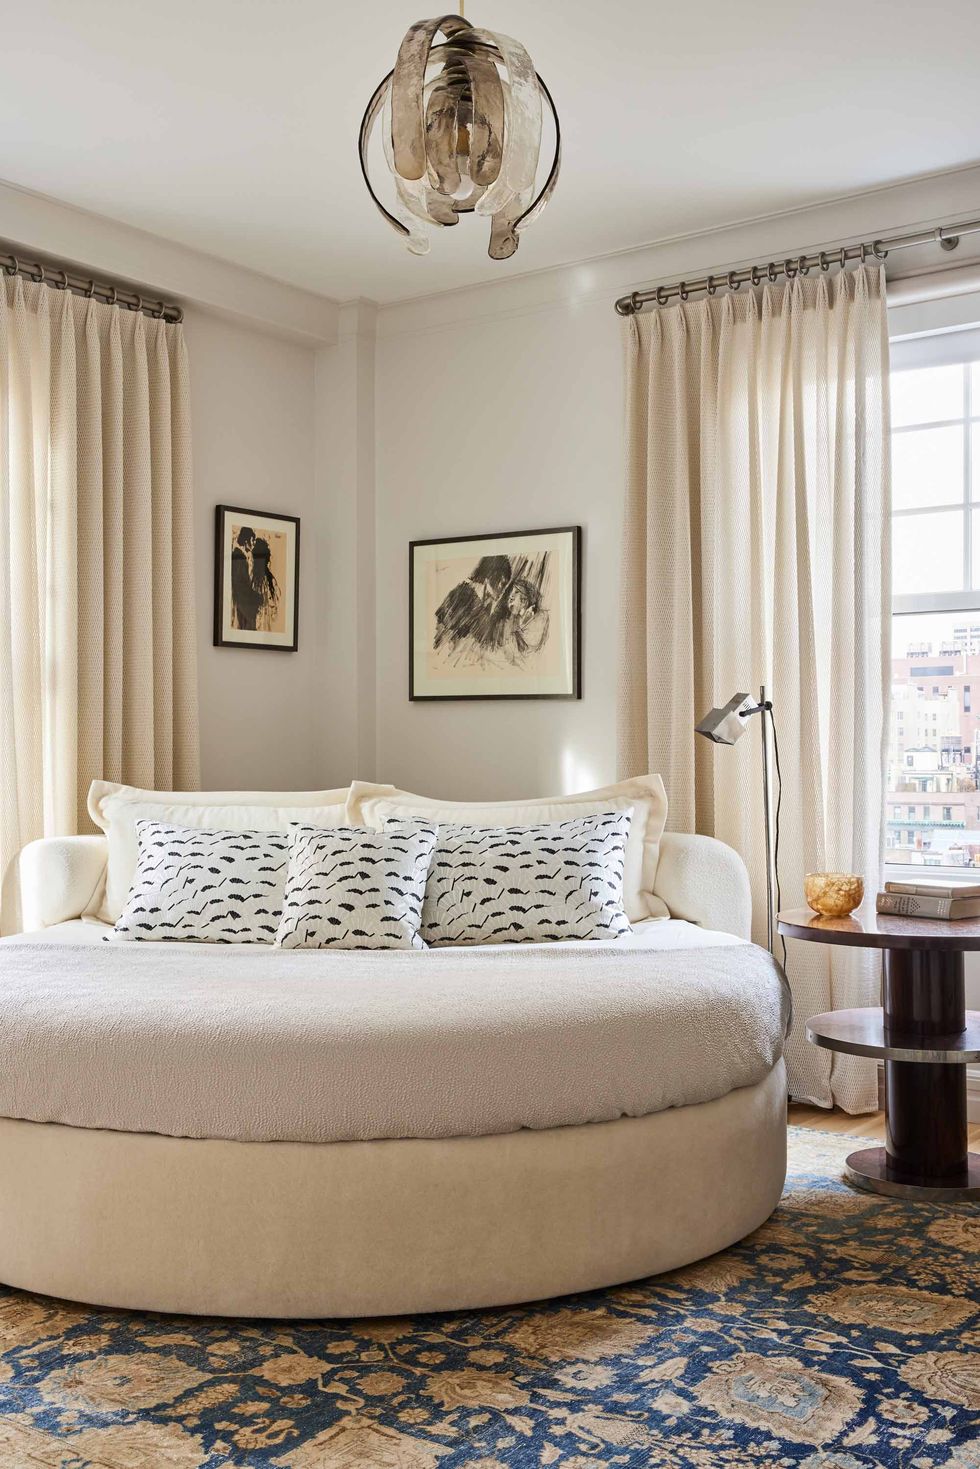 a round bed in a corner with black and white pillows and a two tier round nightstand and cream curtains on the tall windows and some framed artwork in the corner behind it and high pendant lamp